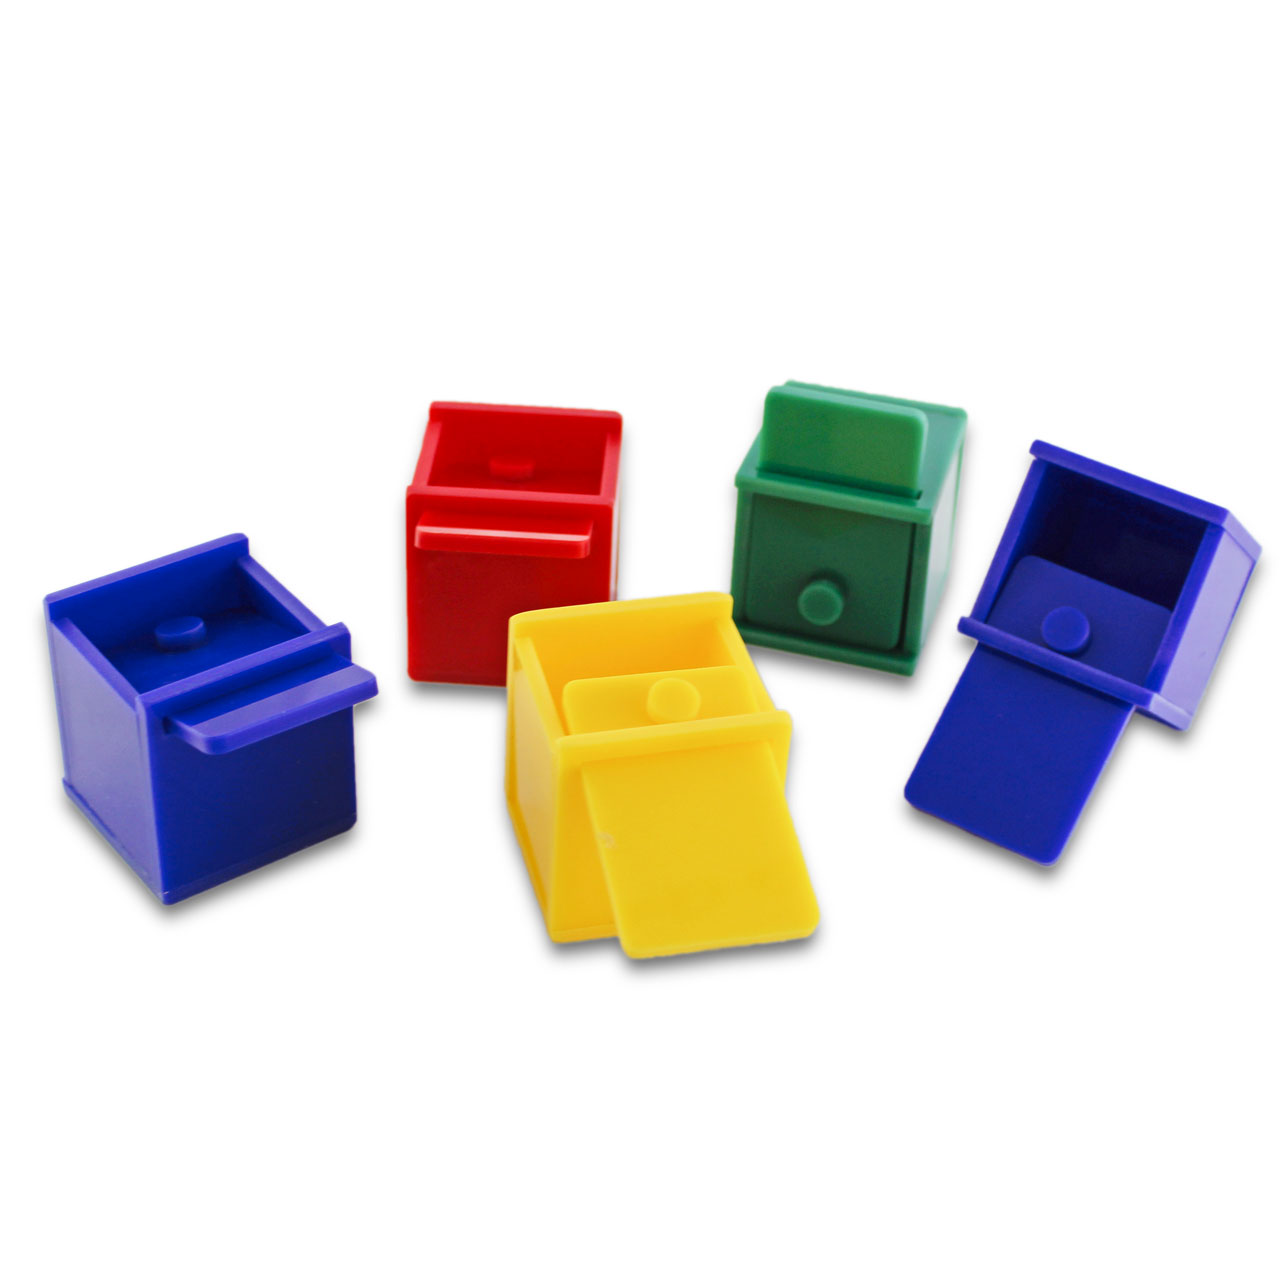 Colored Cube Bird Toy - 5 pack